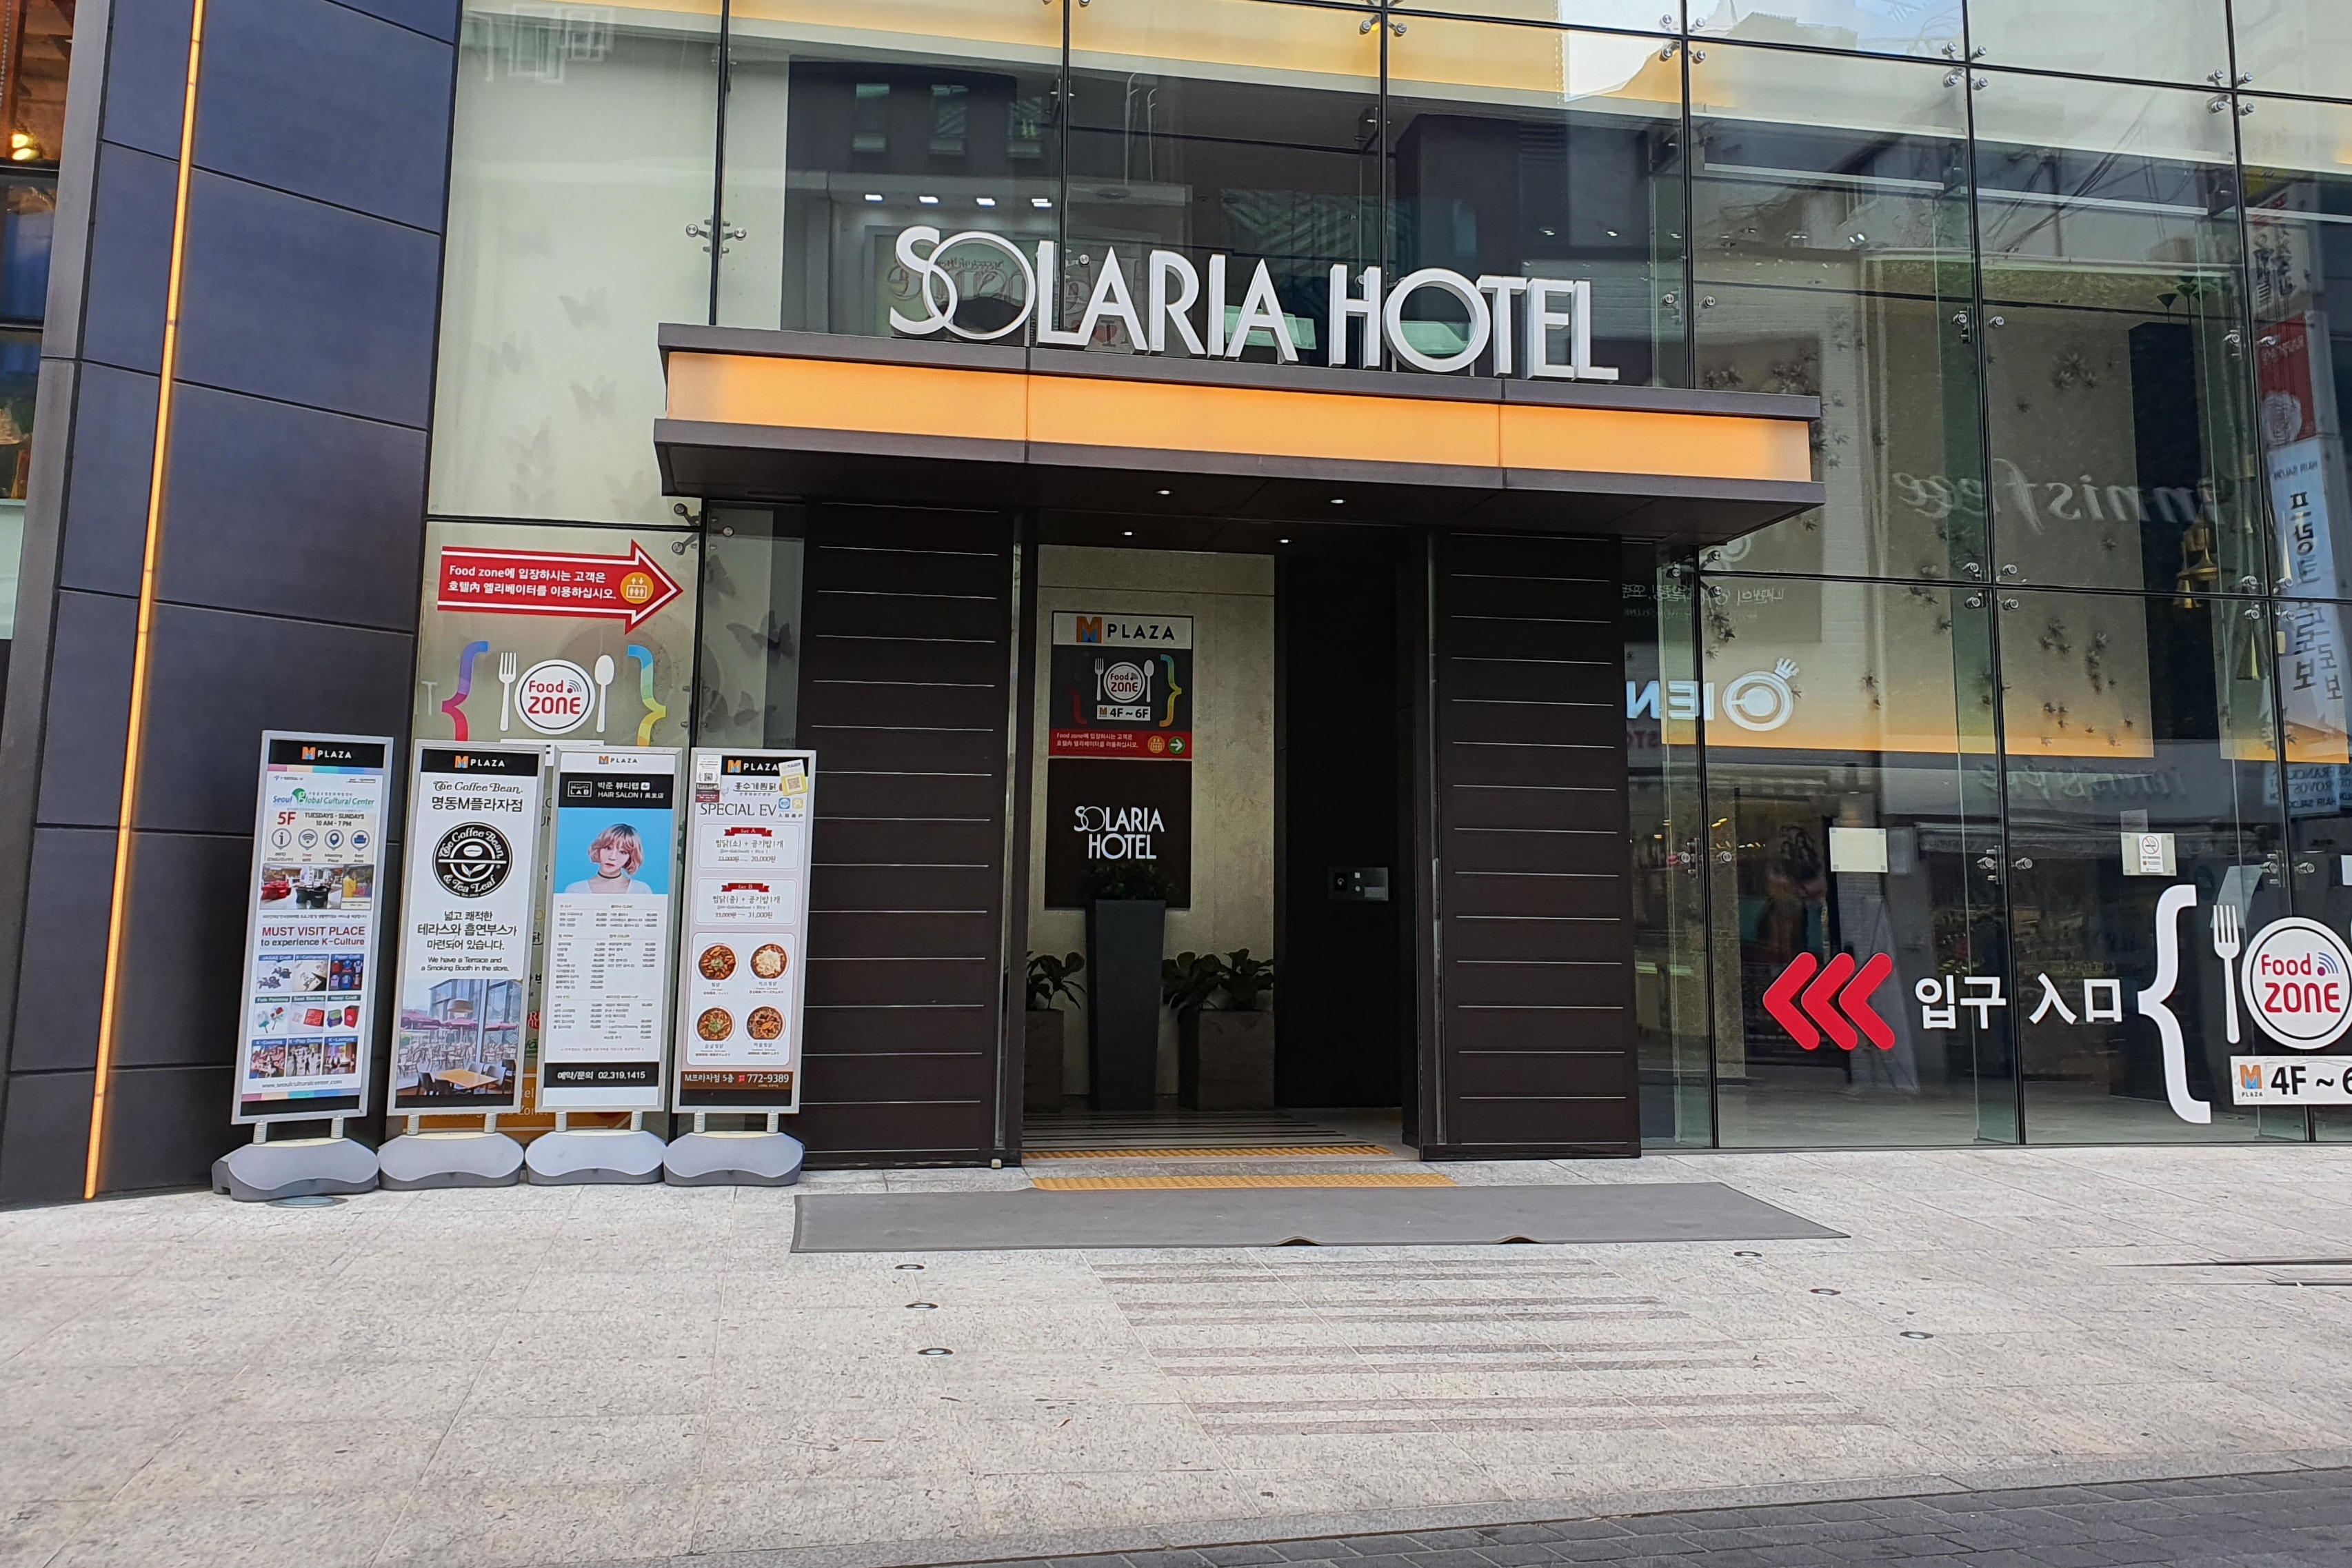 Solaria Nishitetsu Hotel Seoul0 : Main entrance of the hotel from front view